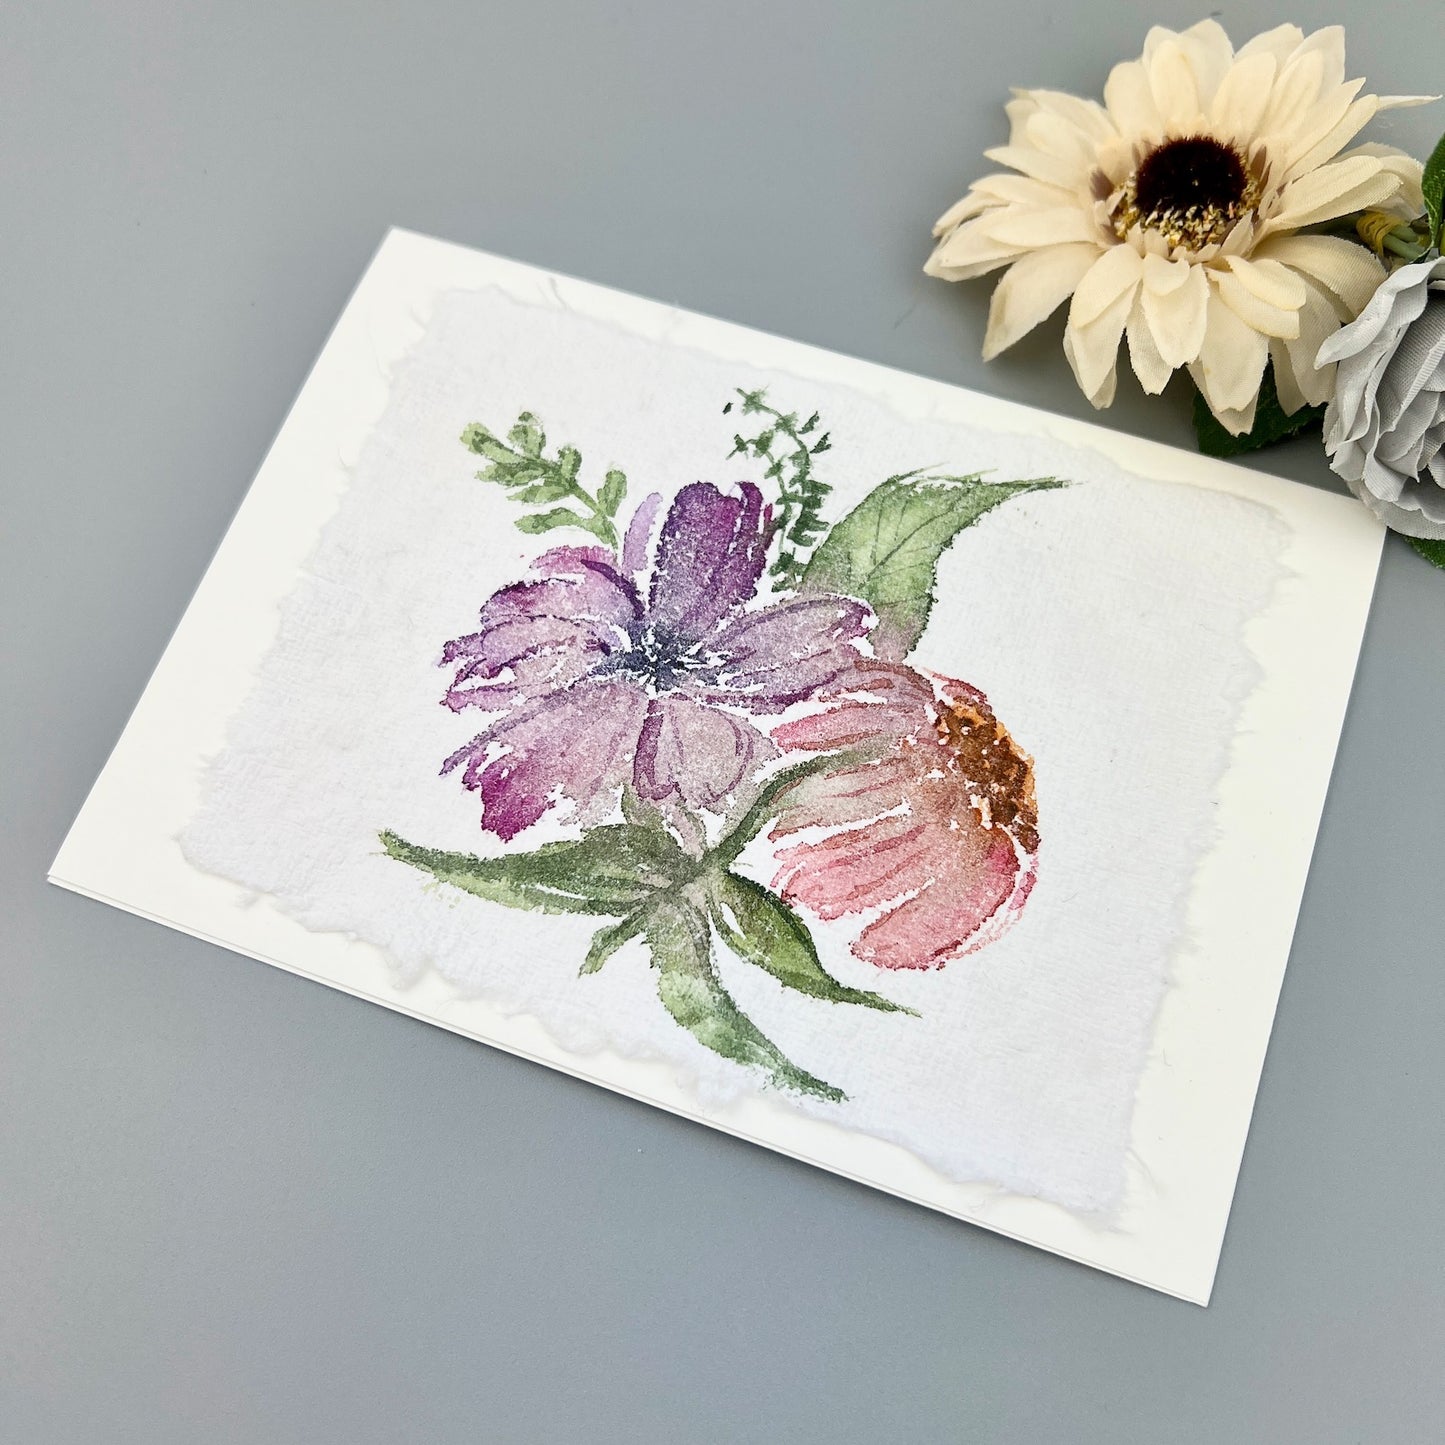 Floral Greeting Card - Hand-painted Greeting Cards - Original Watercolor Stationary